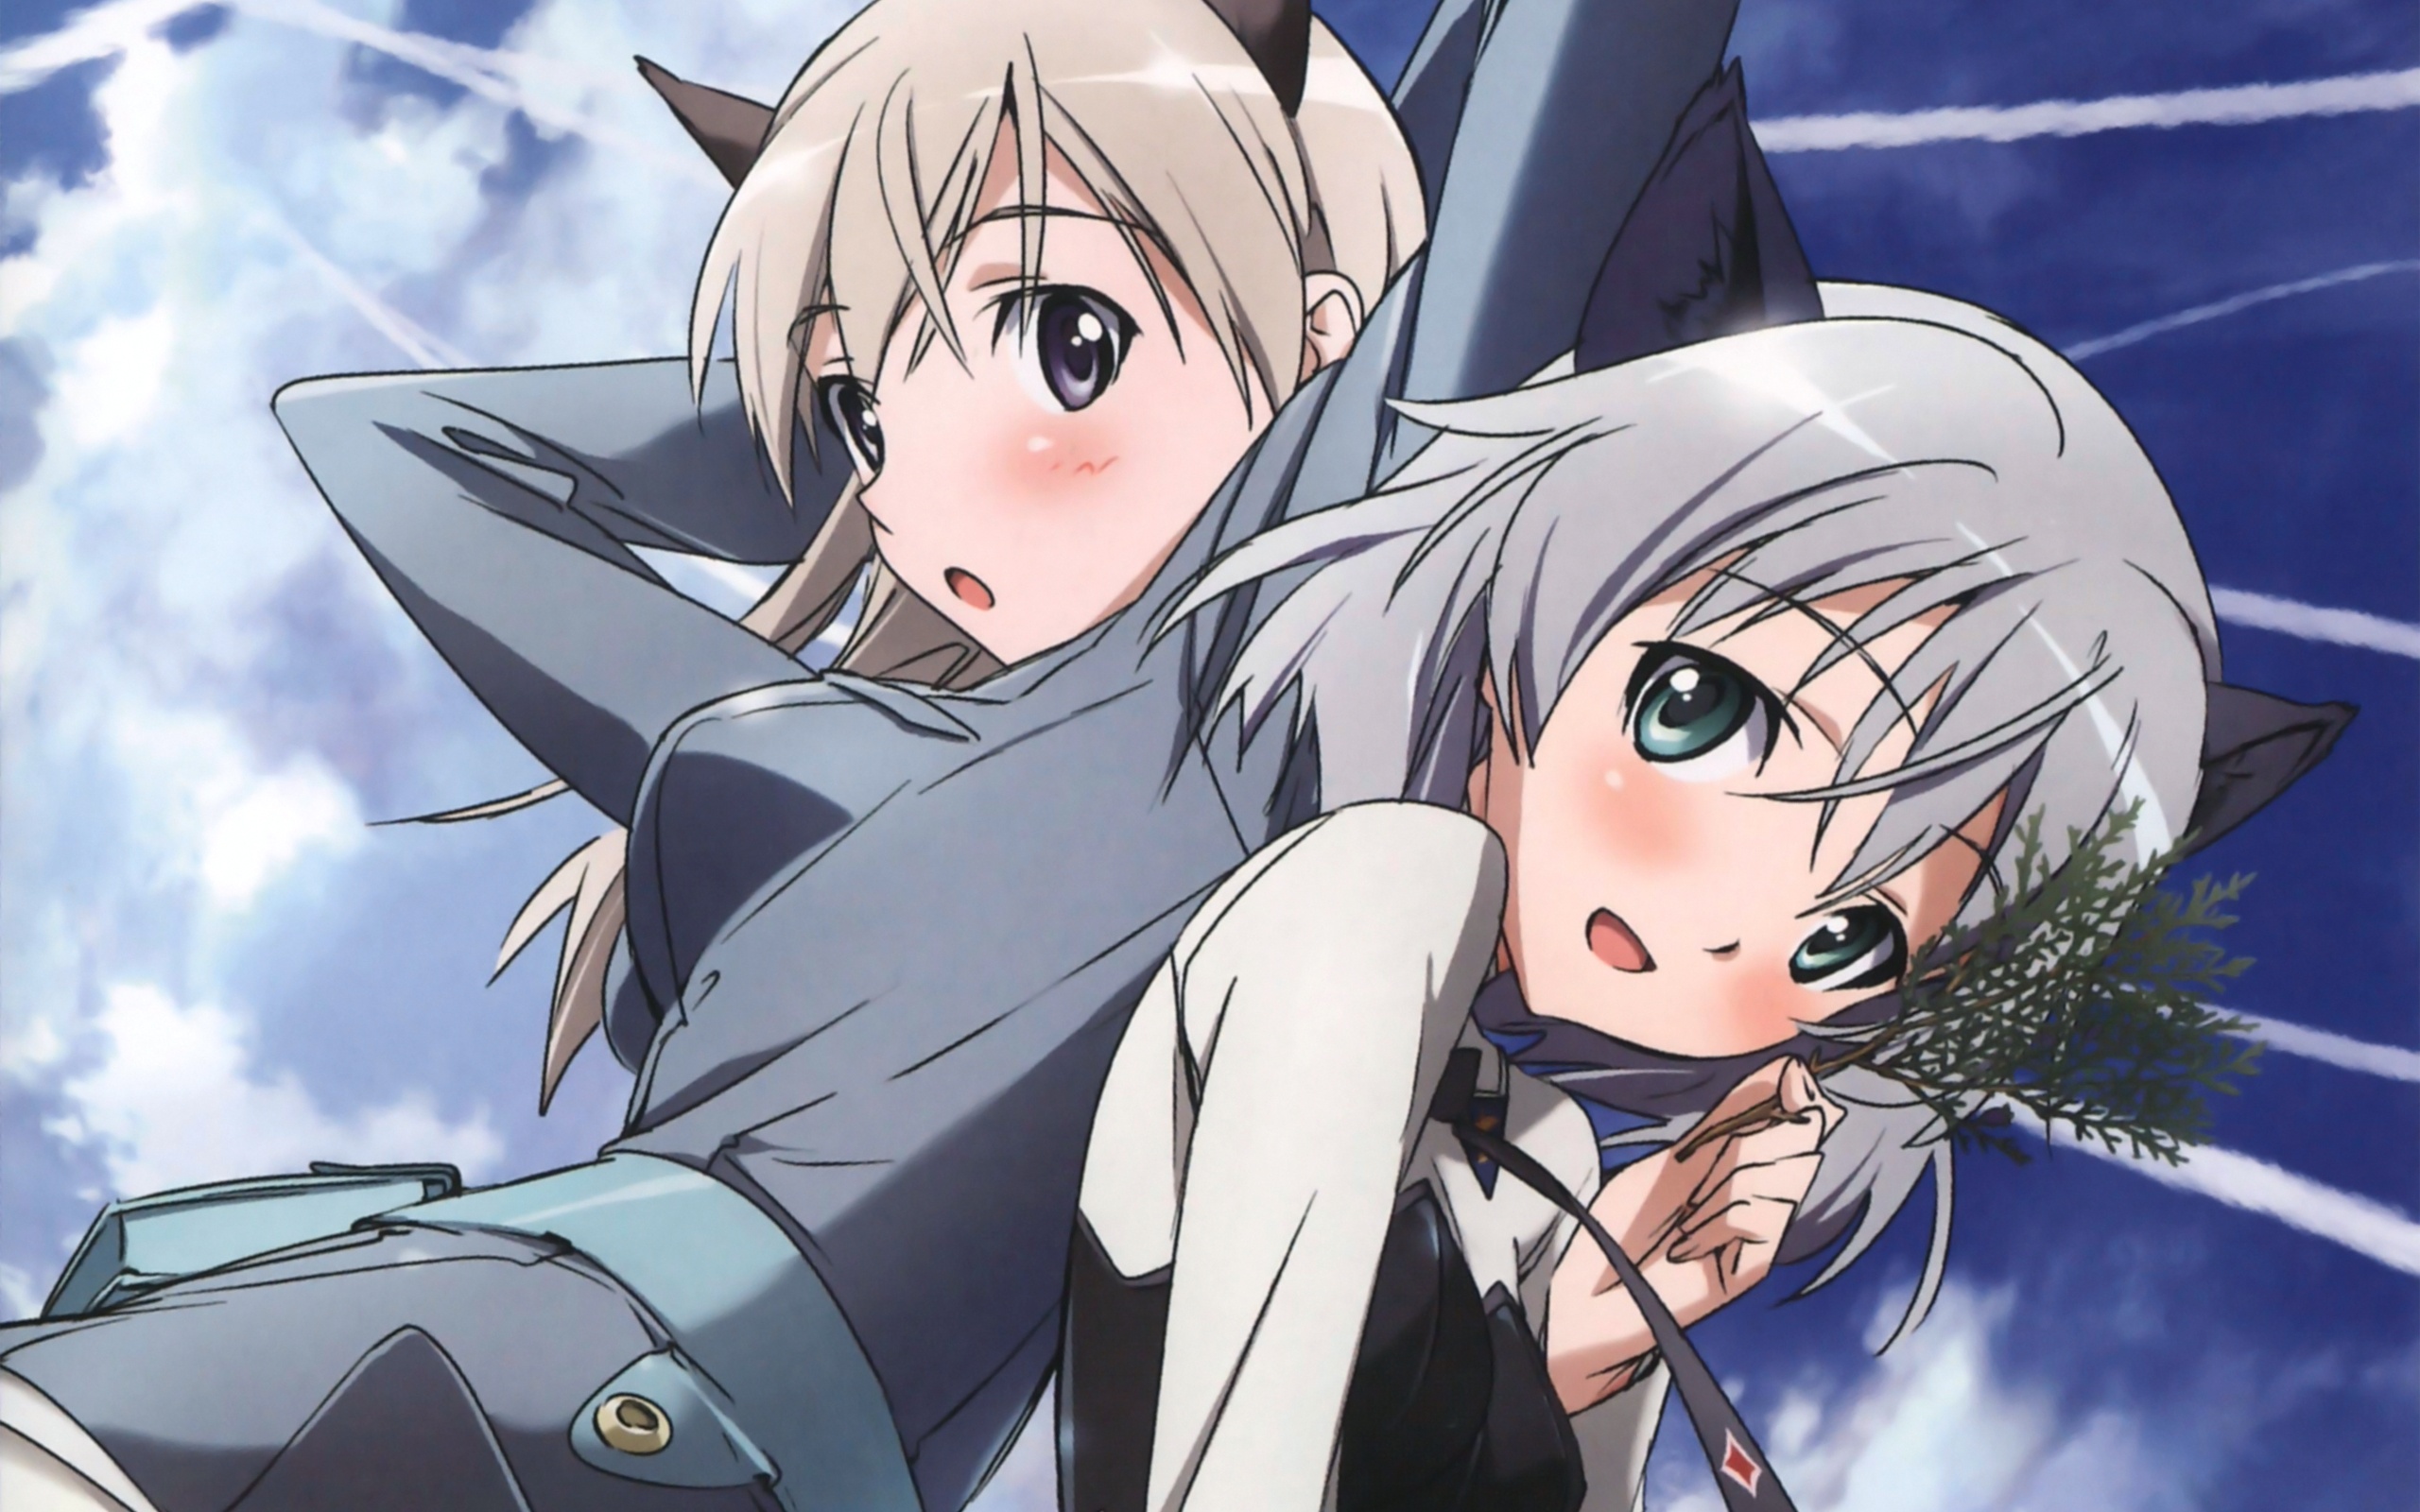 Strike Witches: The Movie #21